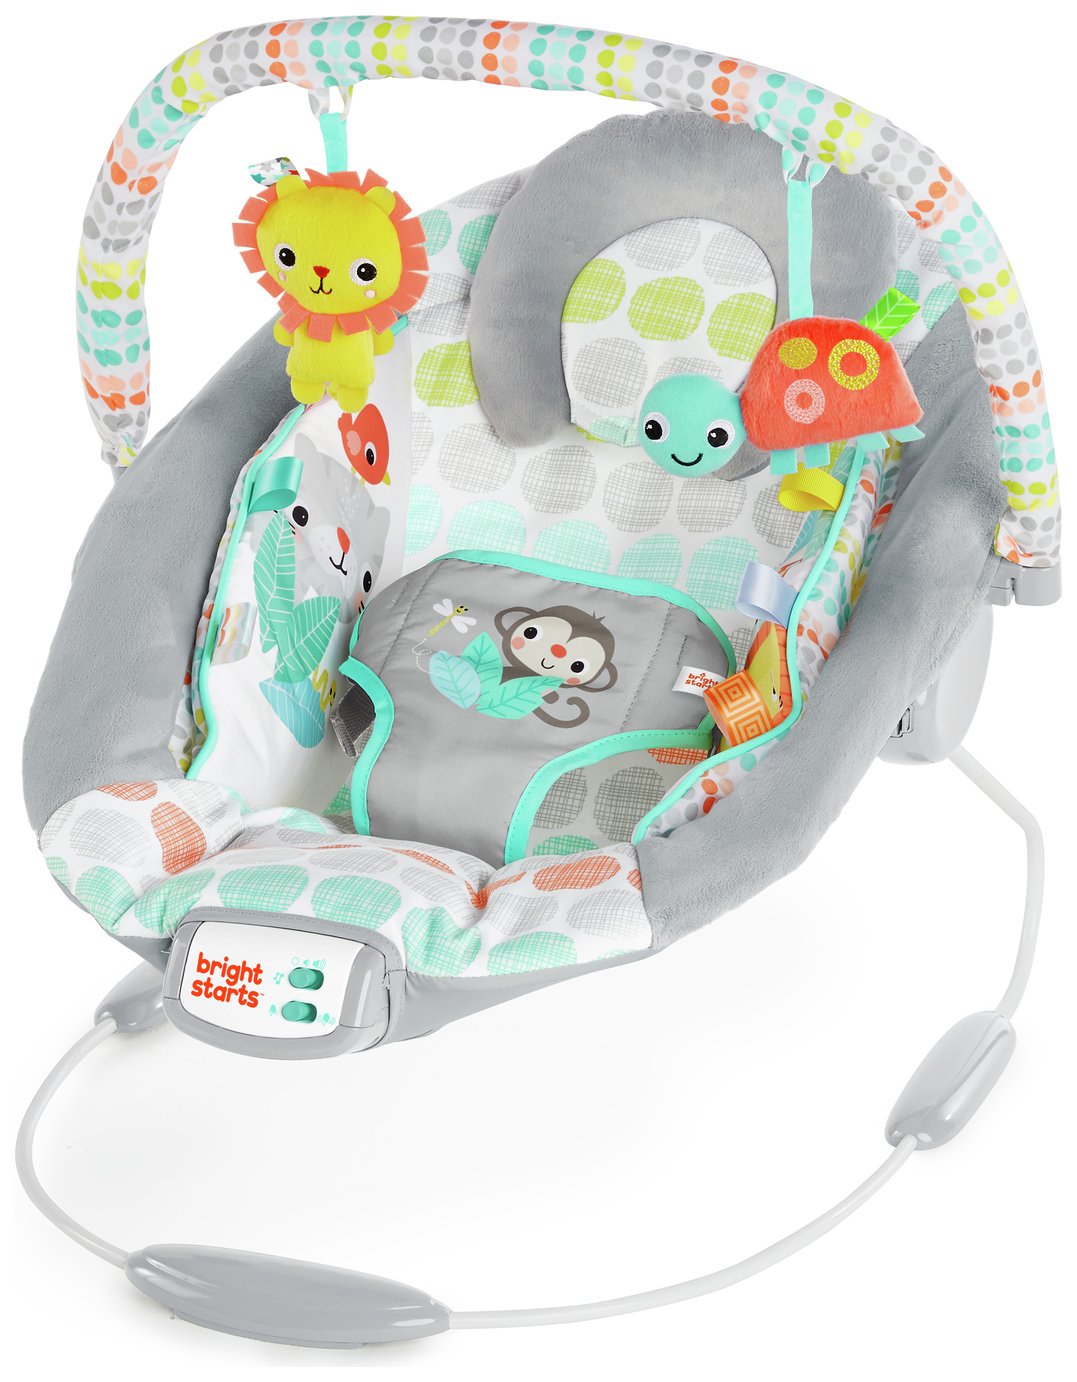 Bright Starts Whimsical Wild Bouncer review